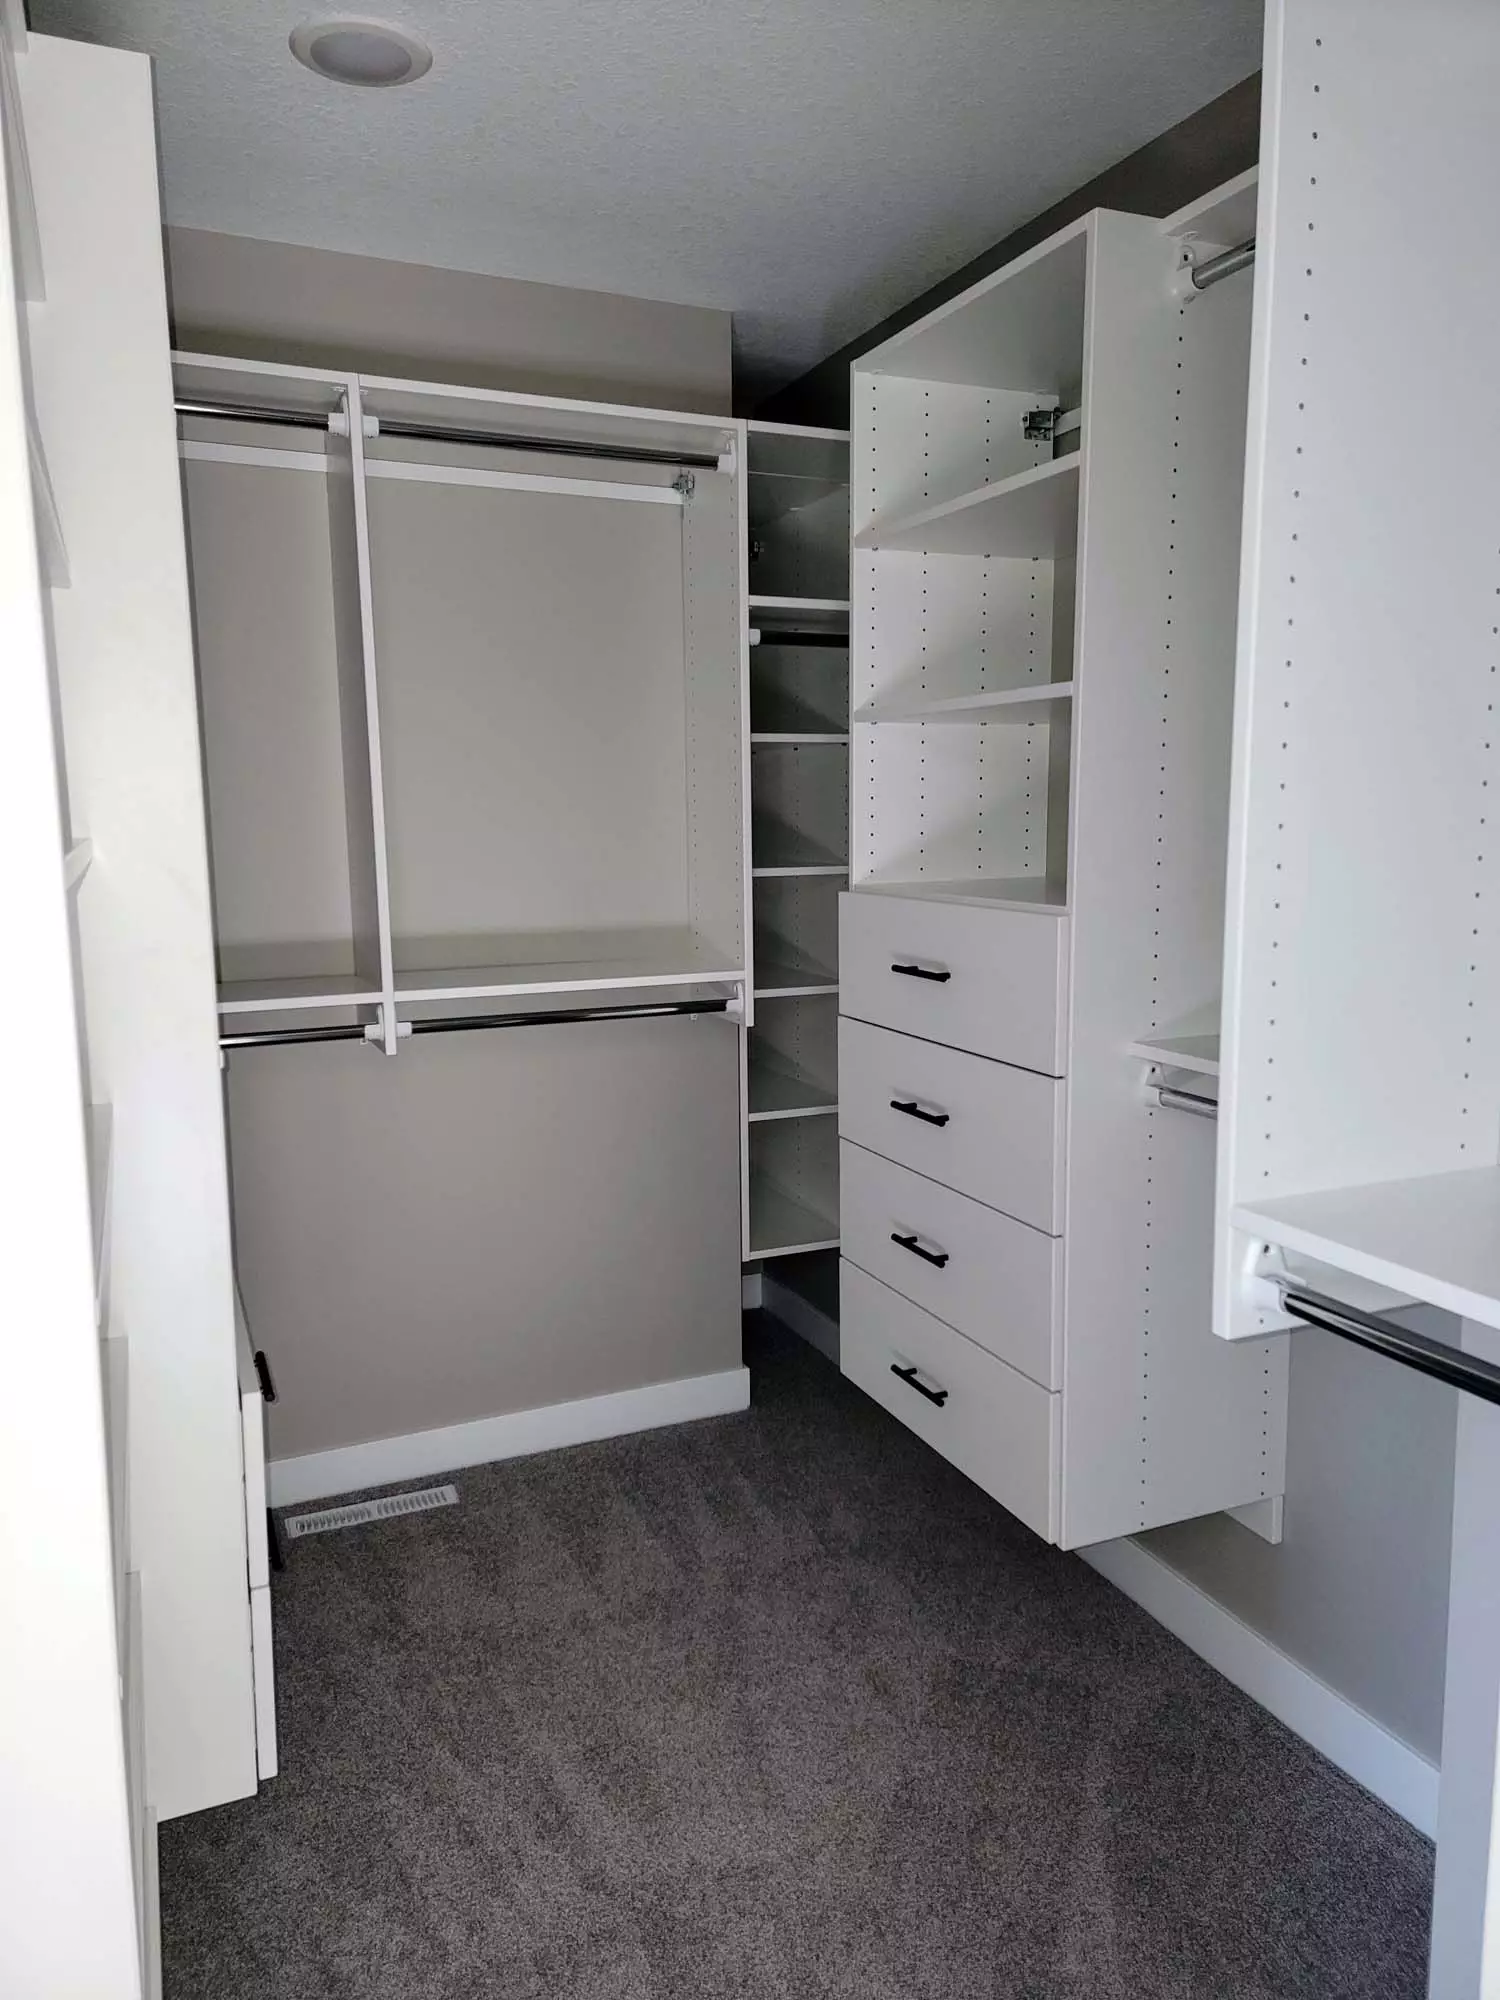 Large walk-in closet with built-in organizers